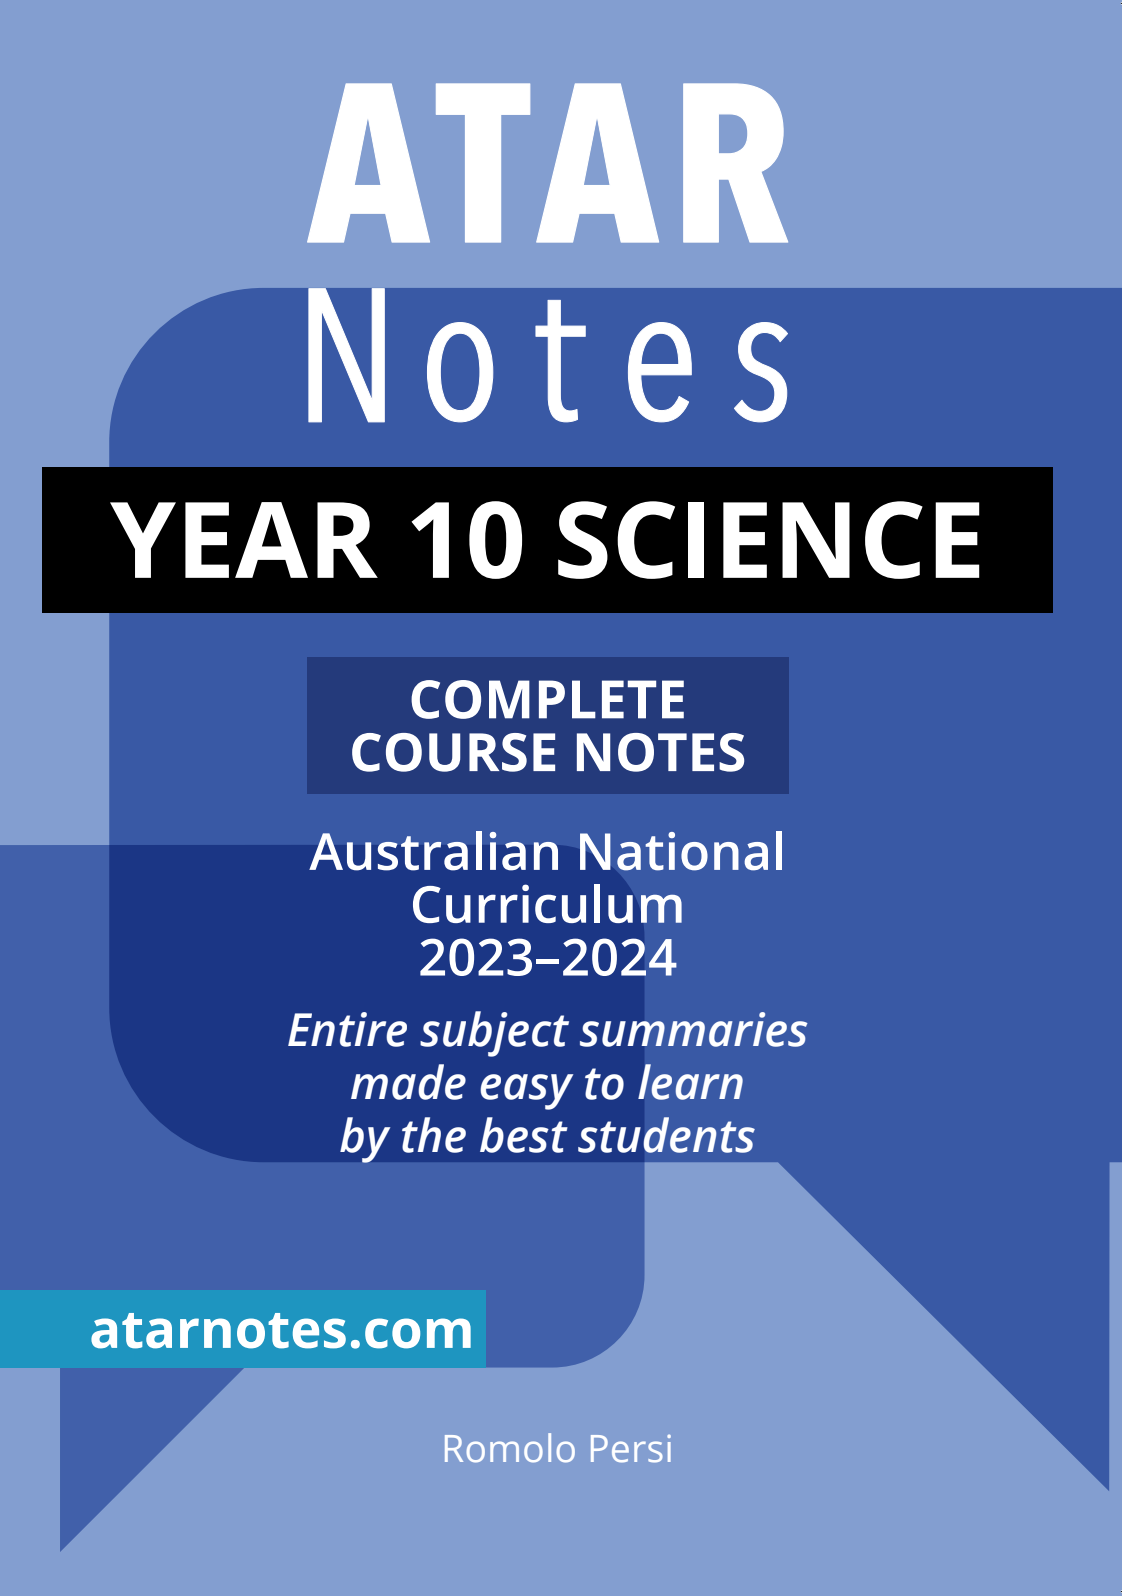 ATAR Notes Year 10 Science Complete Course Notes (2023-2024)